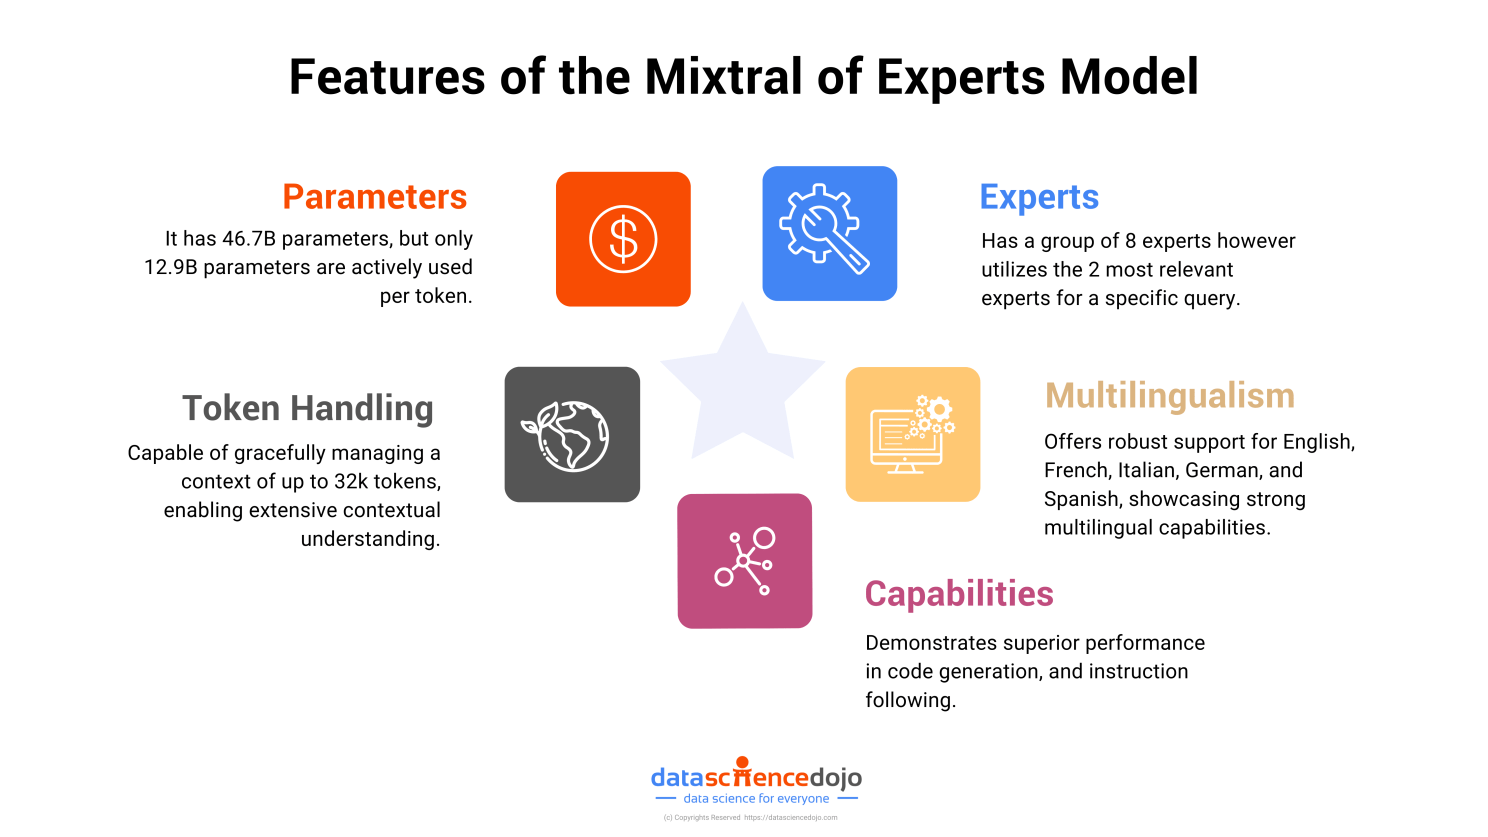 Features of Mixtral of Experts Model